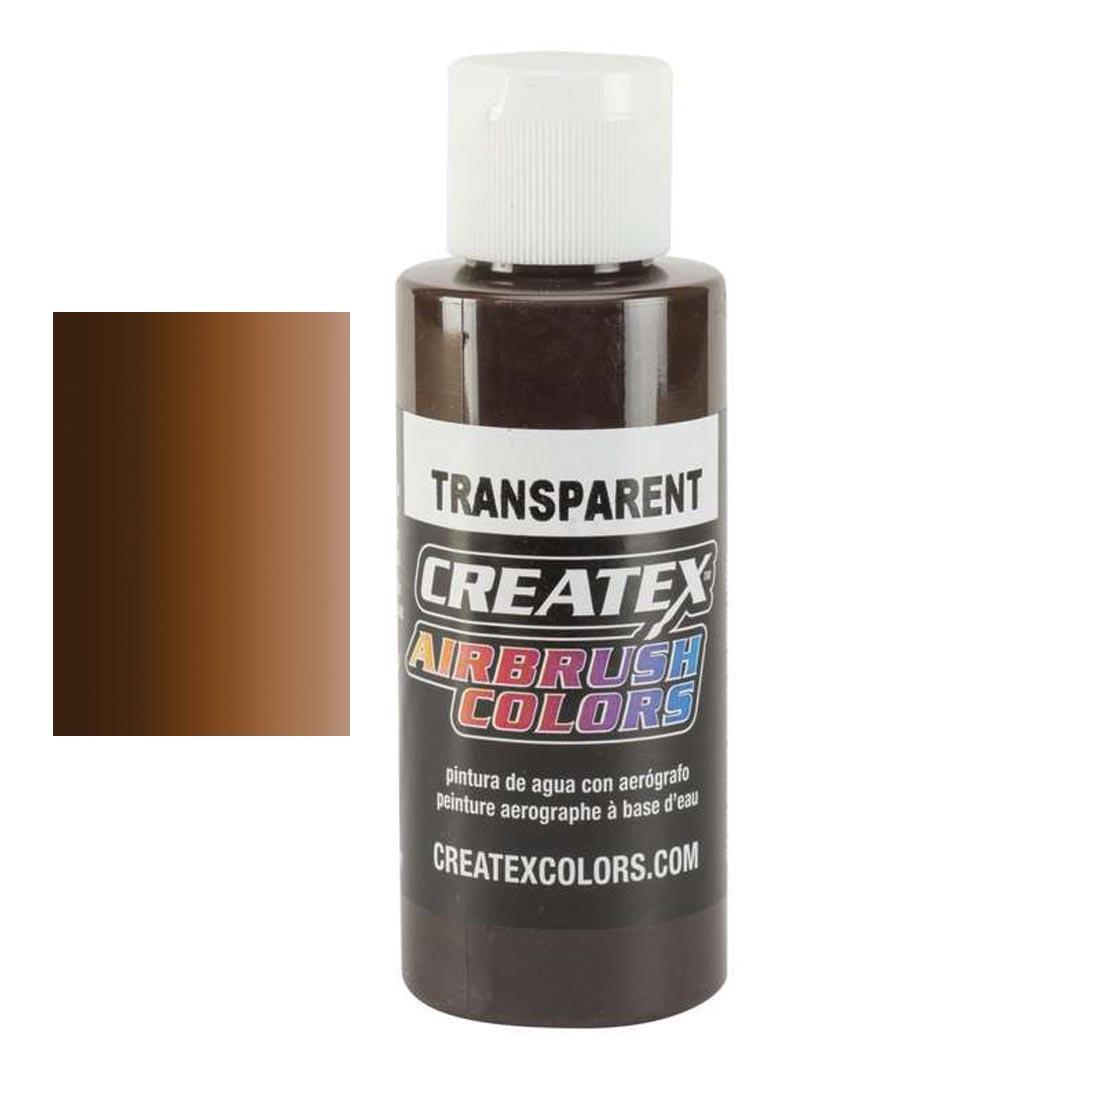 Bottle of Createx Airbrush Color Beside Transparent Dark Brown Color Swatch